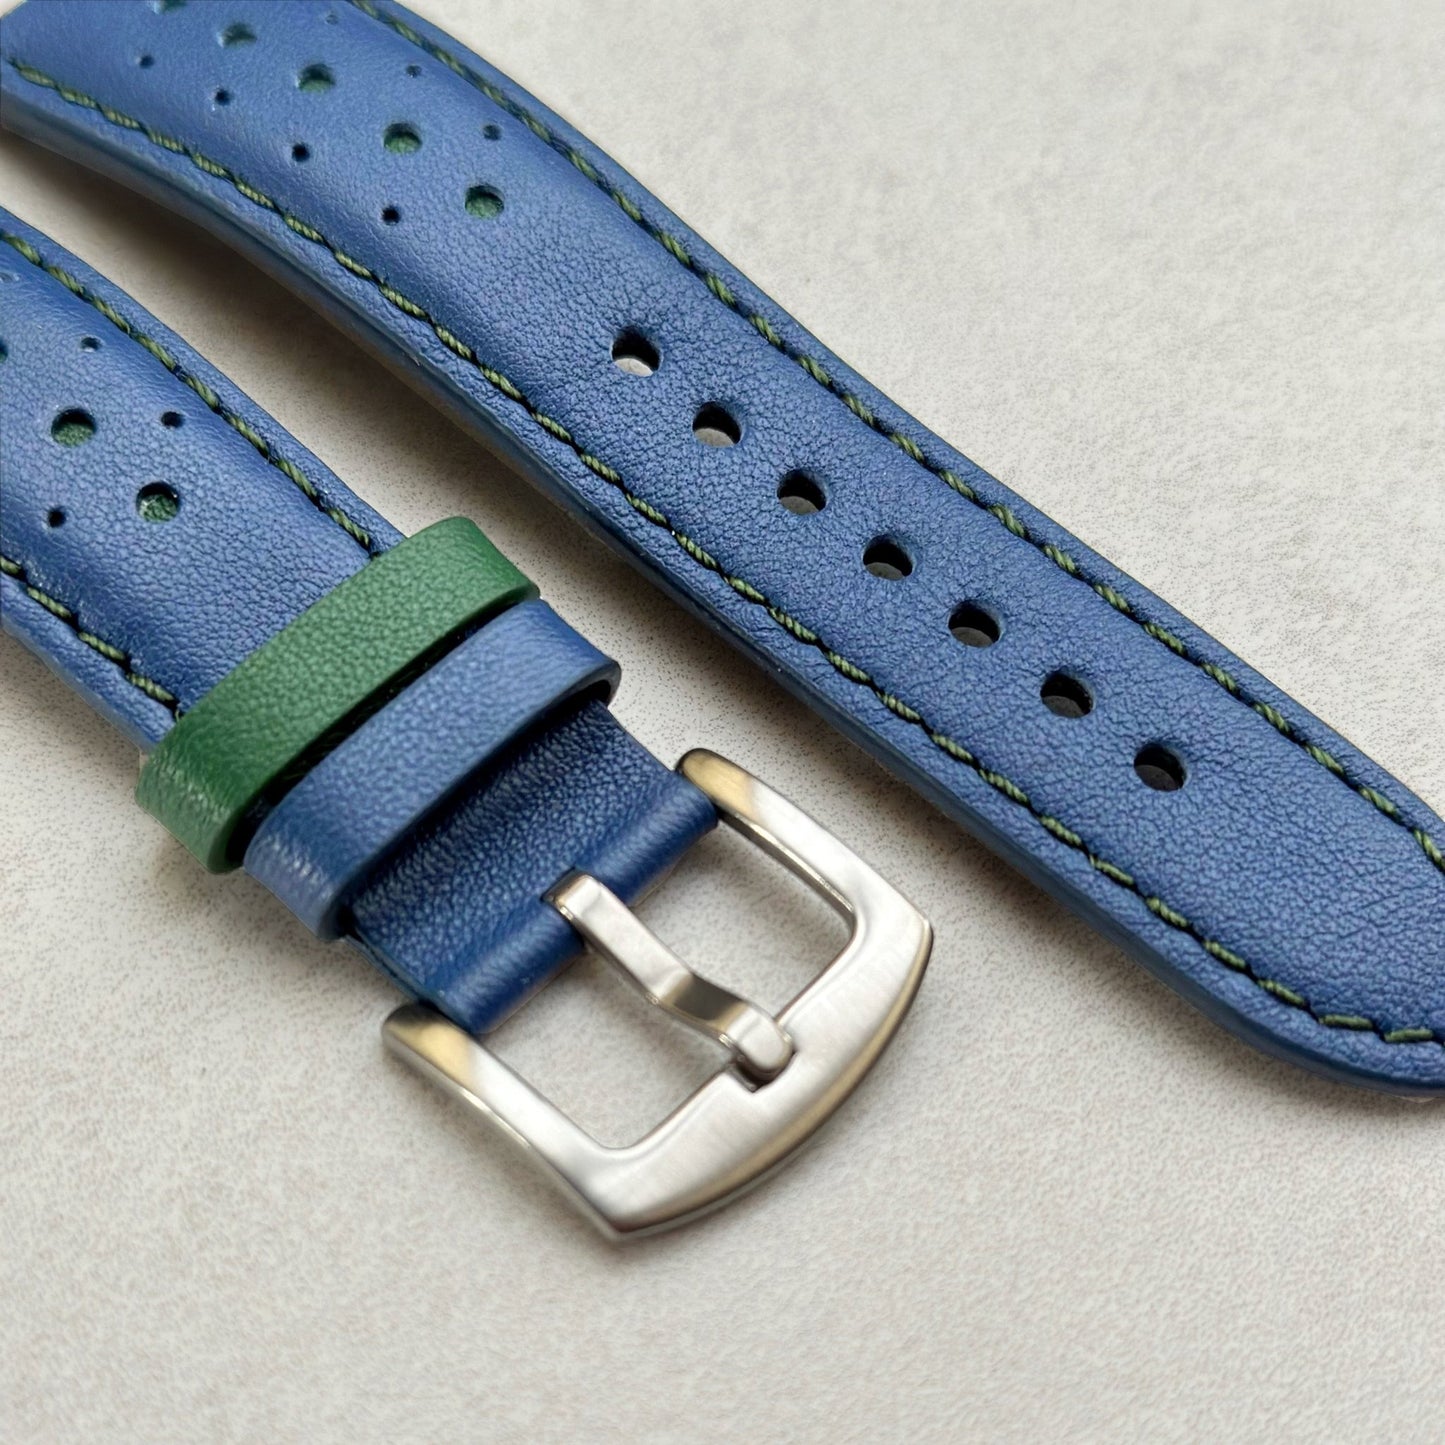 Brushed 316L stainless steel buckle on the Le Mans blue and green full grain leather racing watch strap.